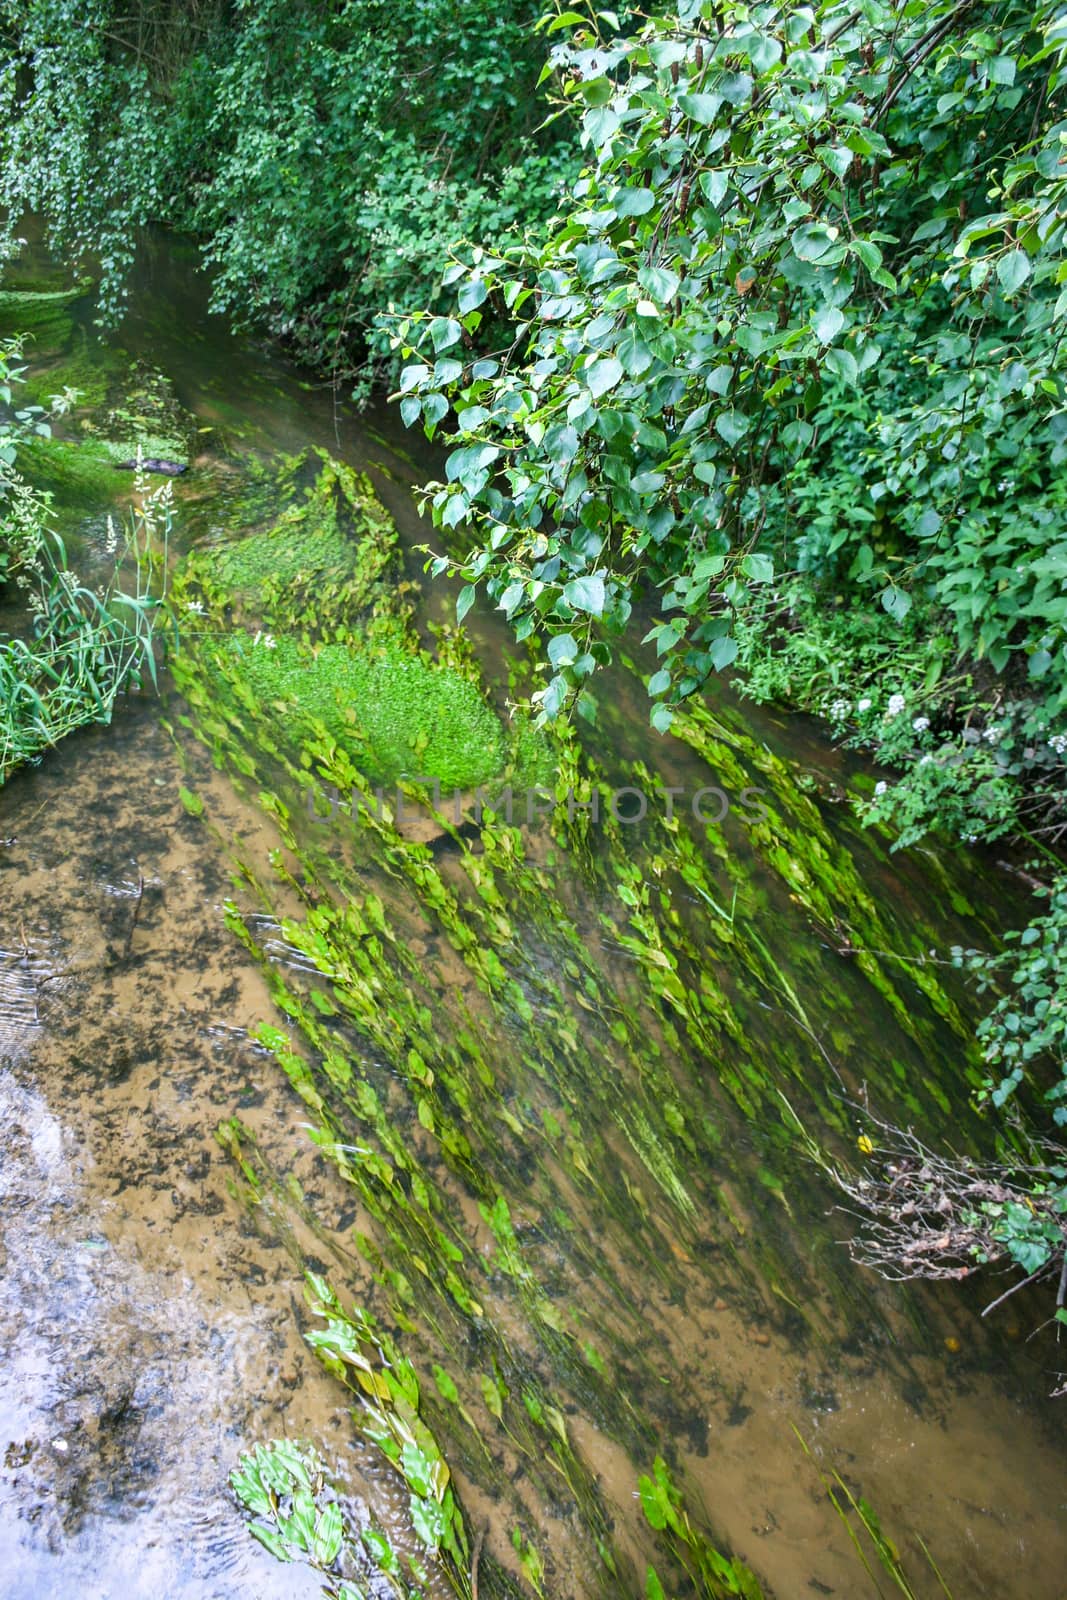 Some green reeds flowing in a stream